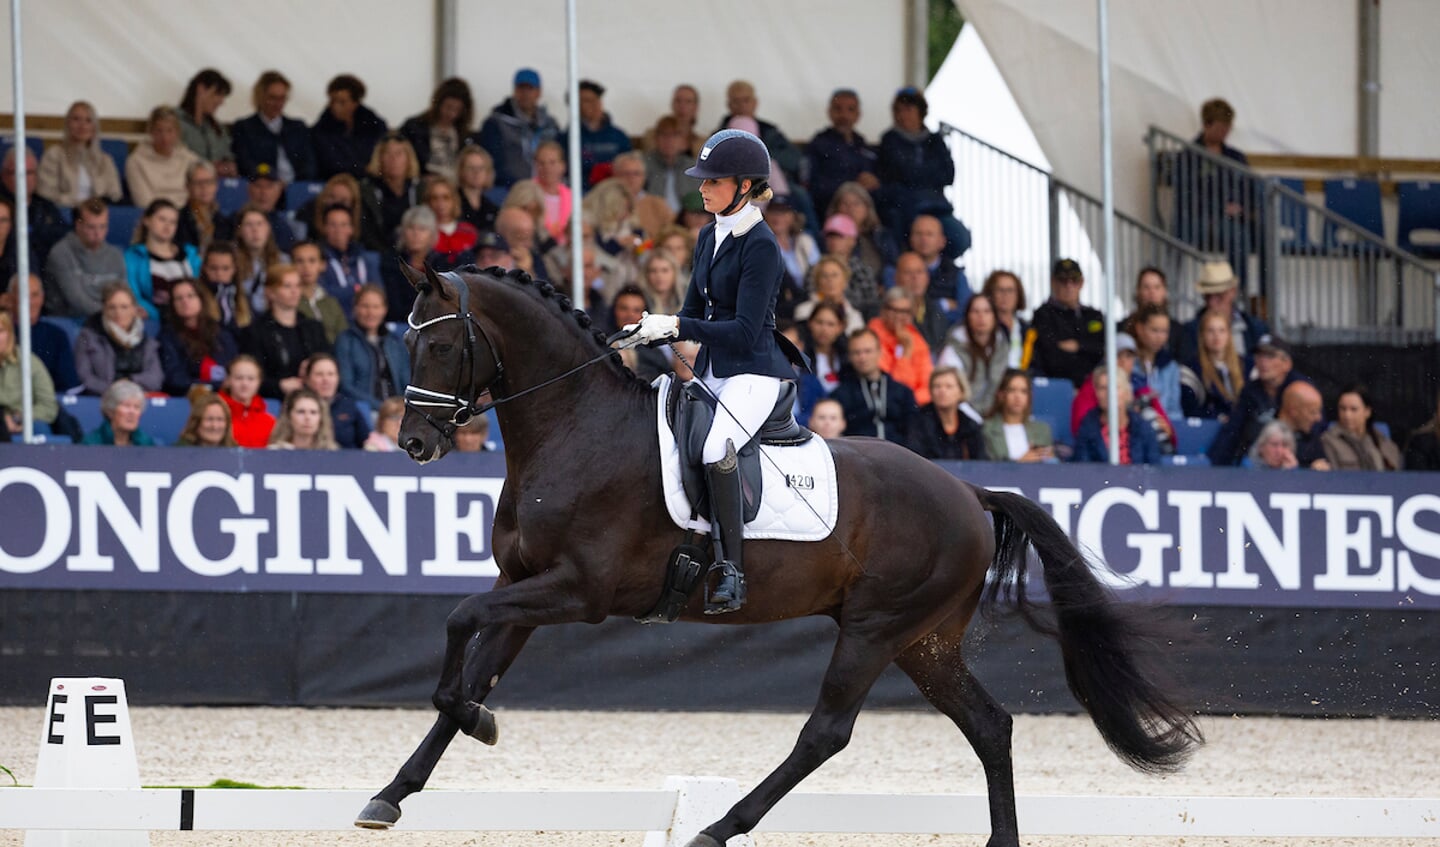 Dinja van Liere - On Air
Longines FEI/WBFSH World Breeding Dressage Championships for Young Horses 2023
© DigiShots